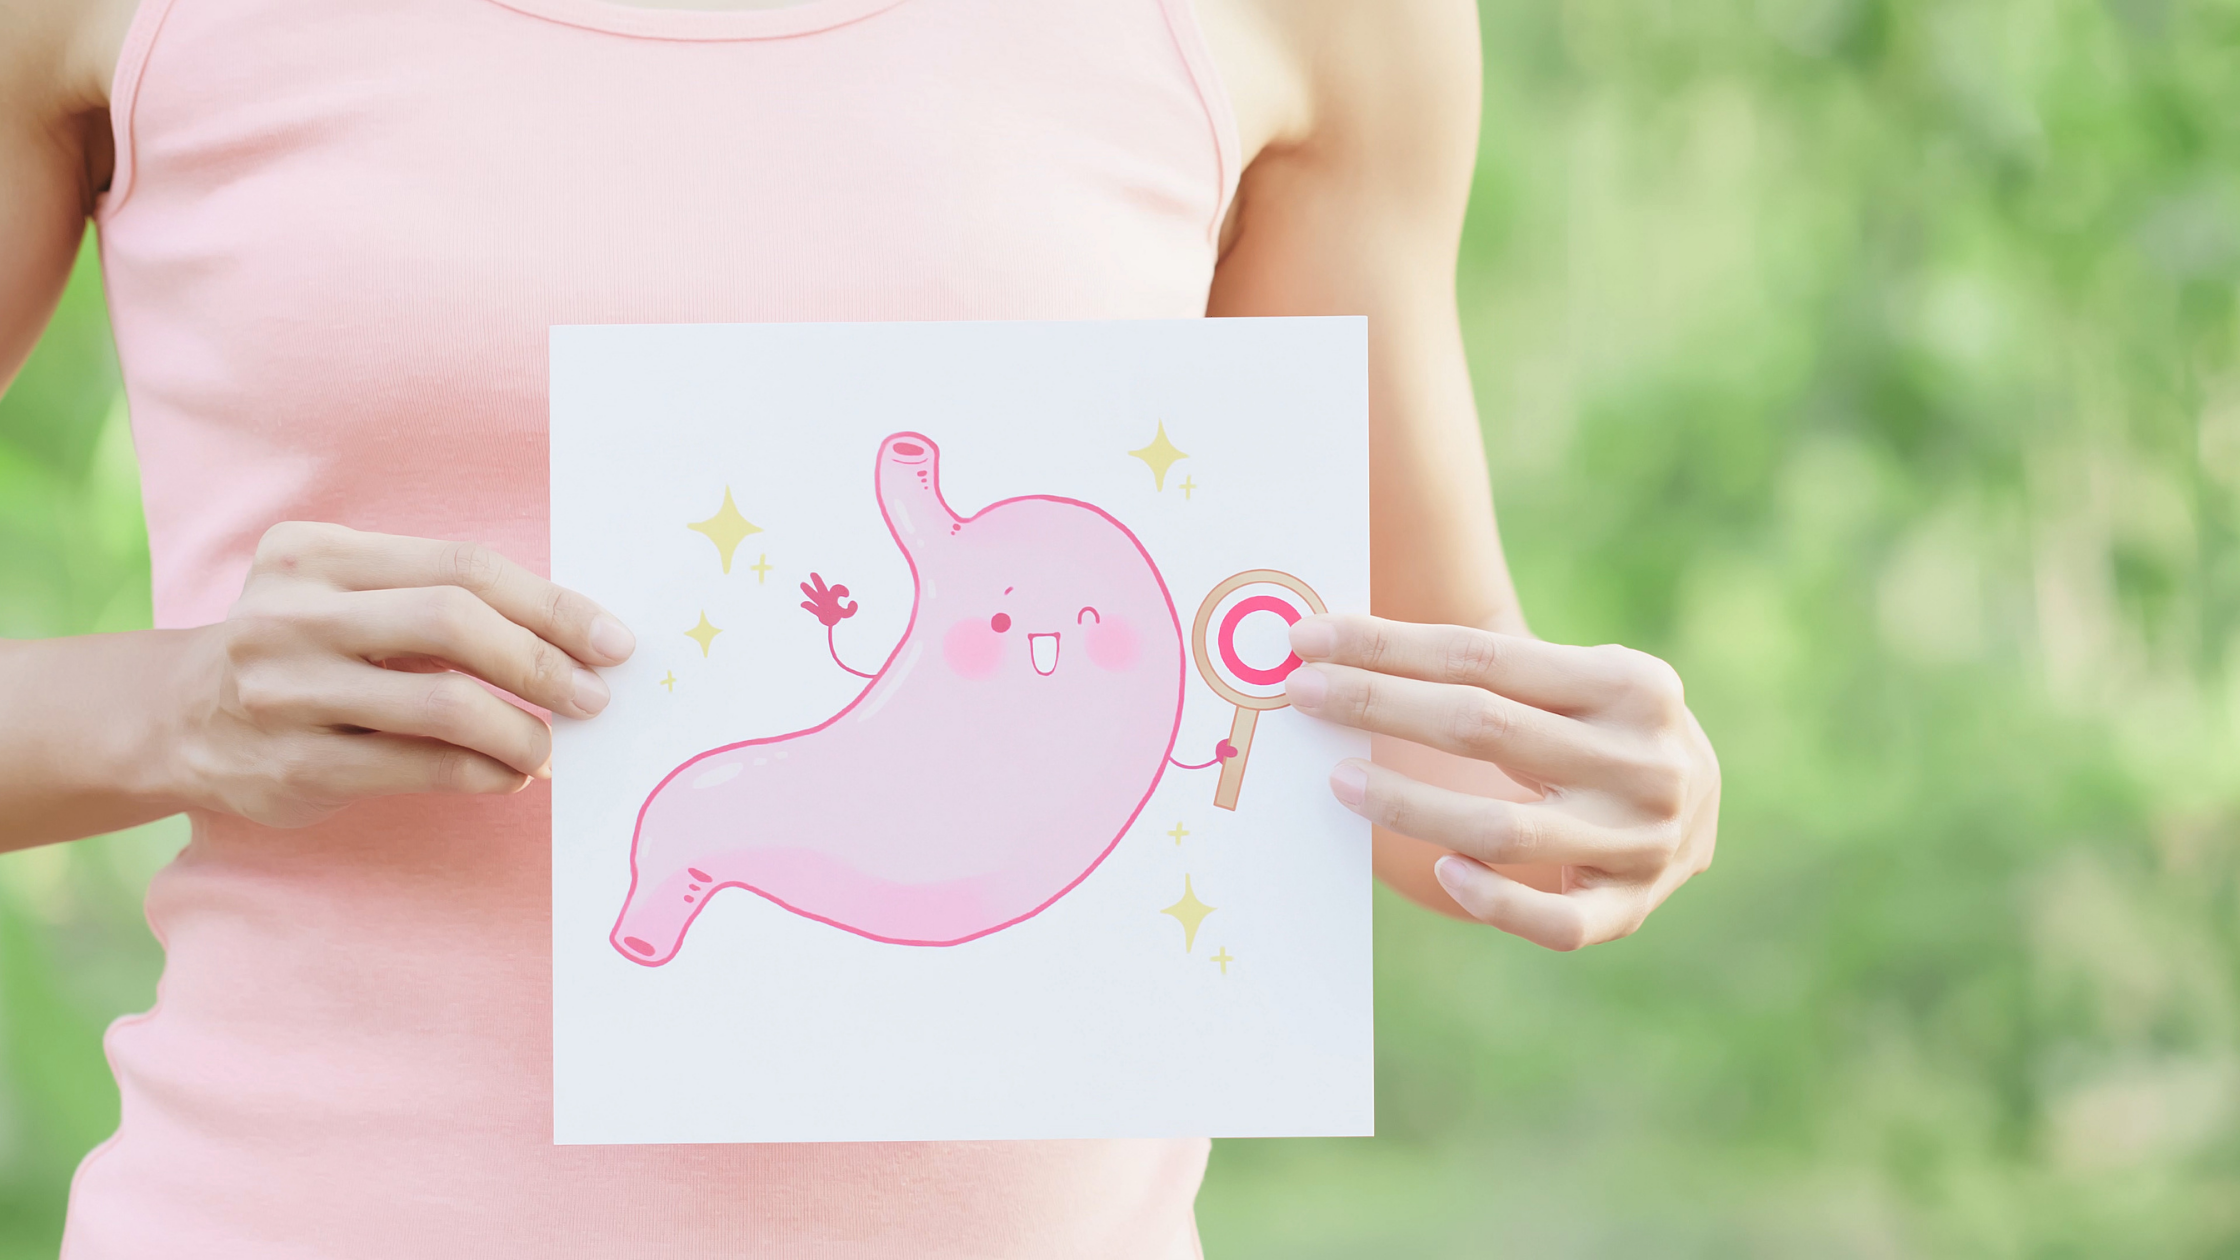 Woman holding illustration of a bladder with a smiley face on it